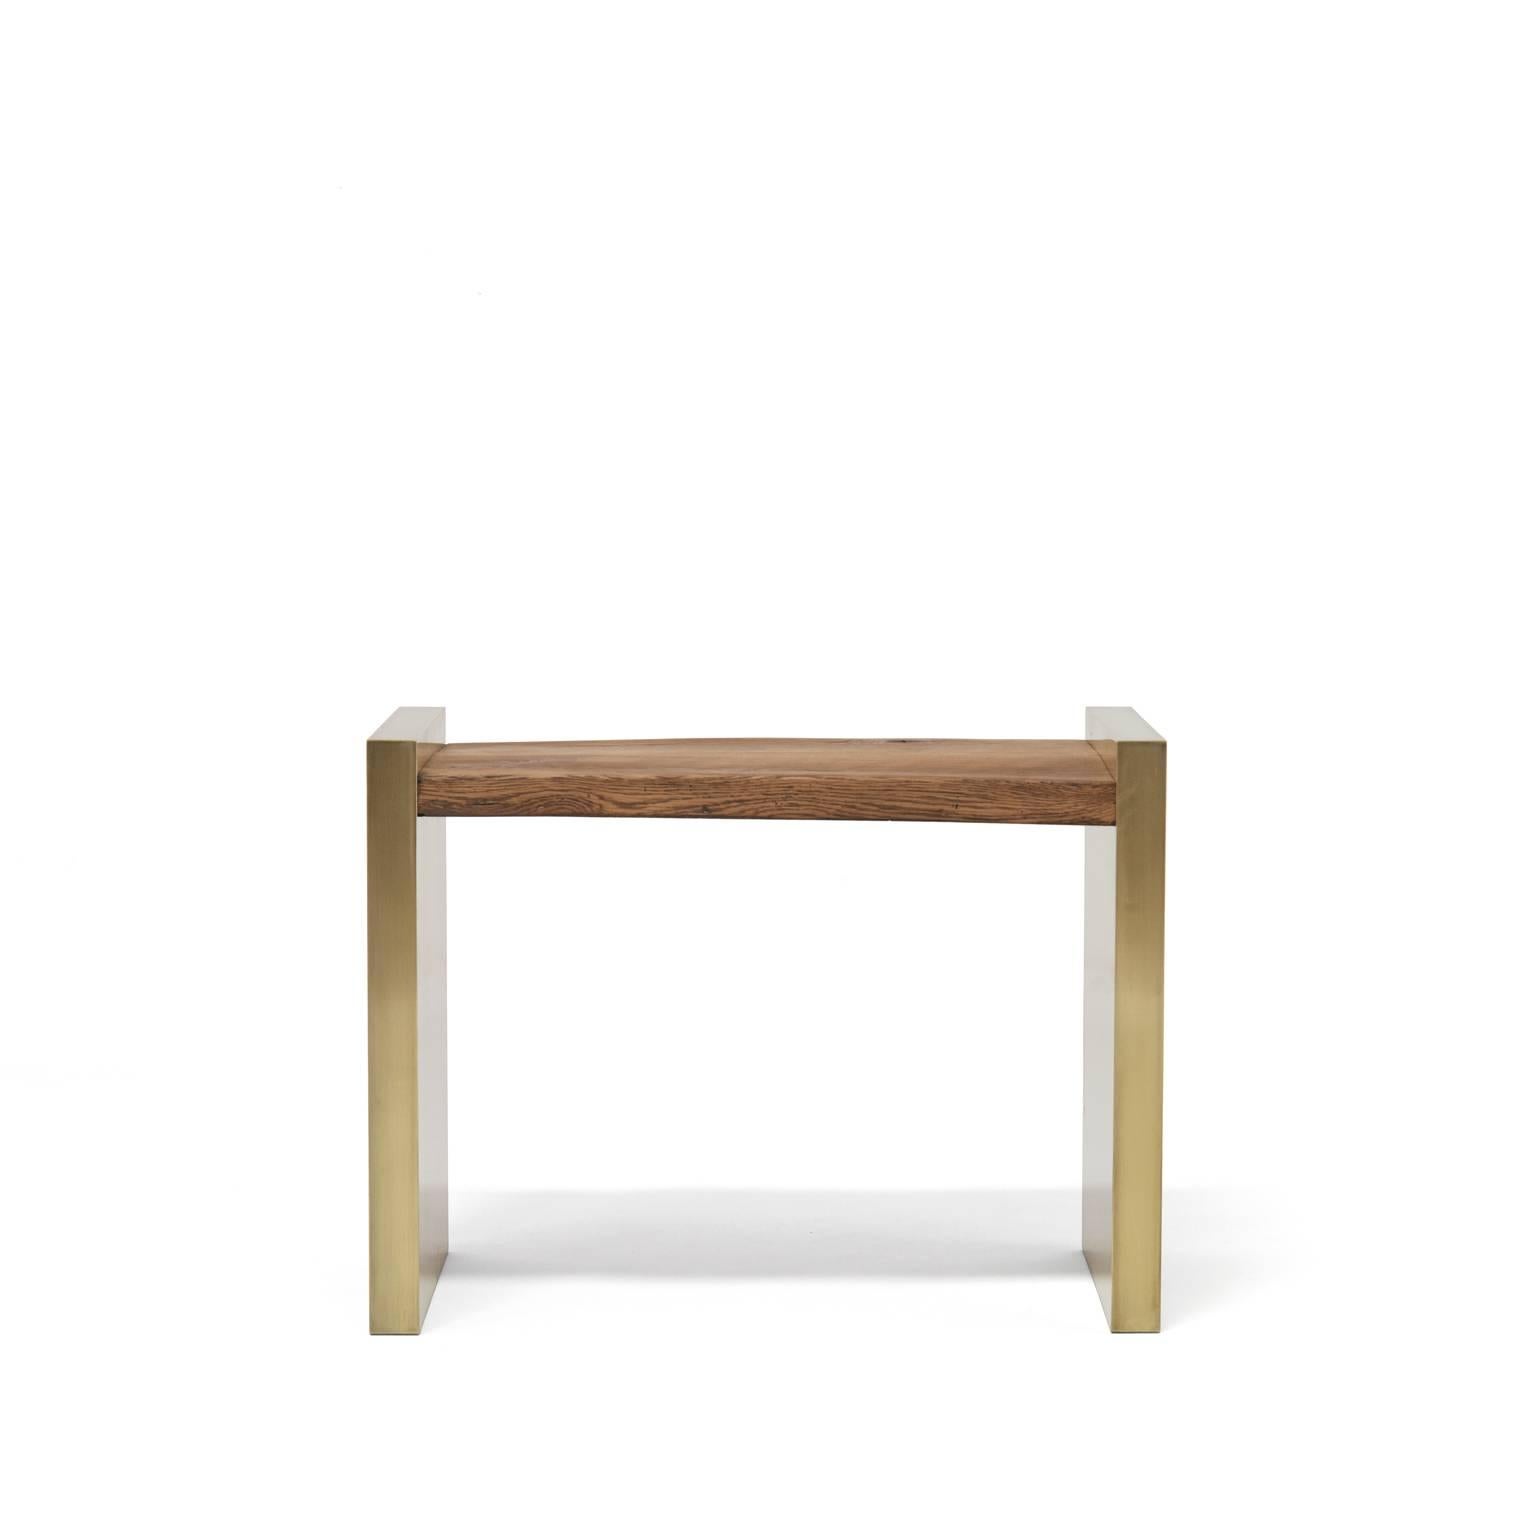 Atelier Demiurge Collection Laight Bench shown in 19th century oak with a natural wax finish and patinated brass. Inquire for finish and customization options.

Atelier Demiurge Collection pieces are made to order and custom sizes are available.